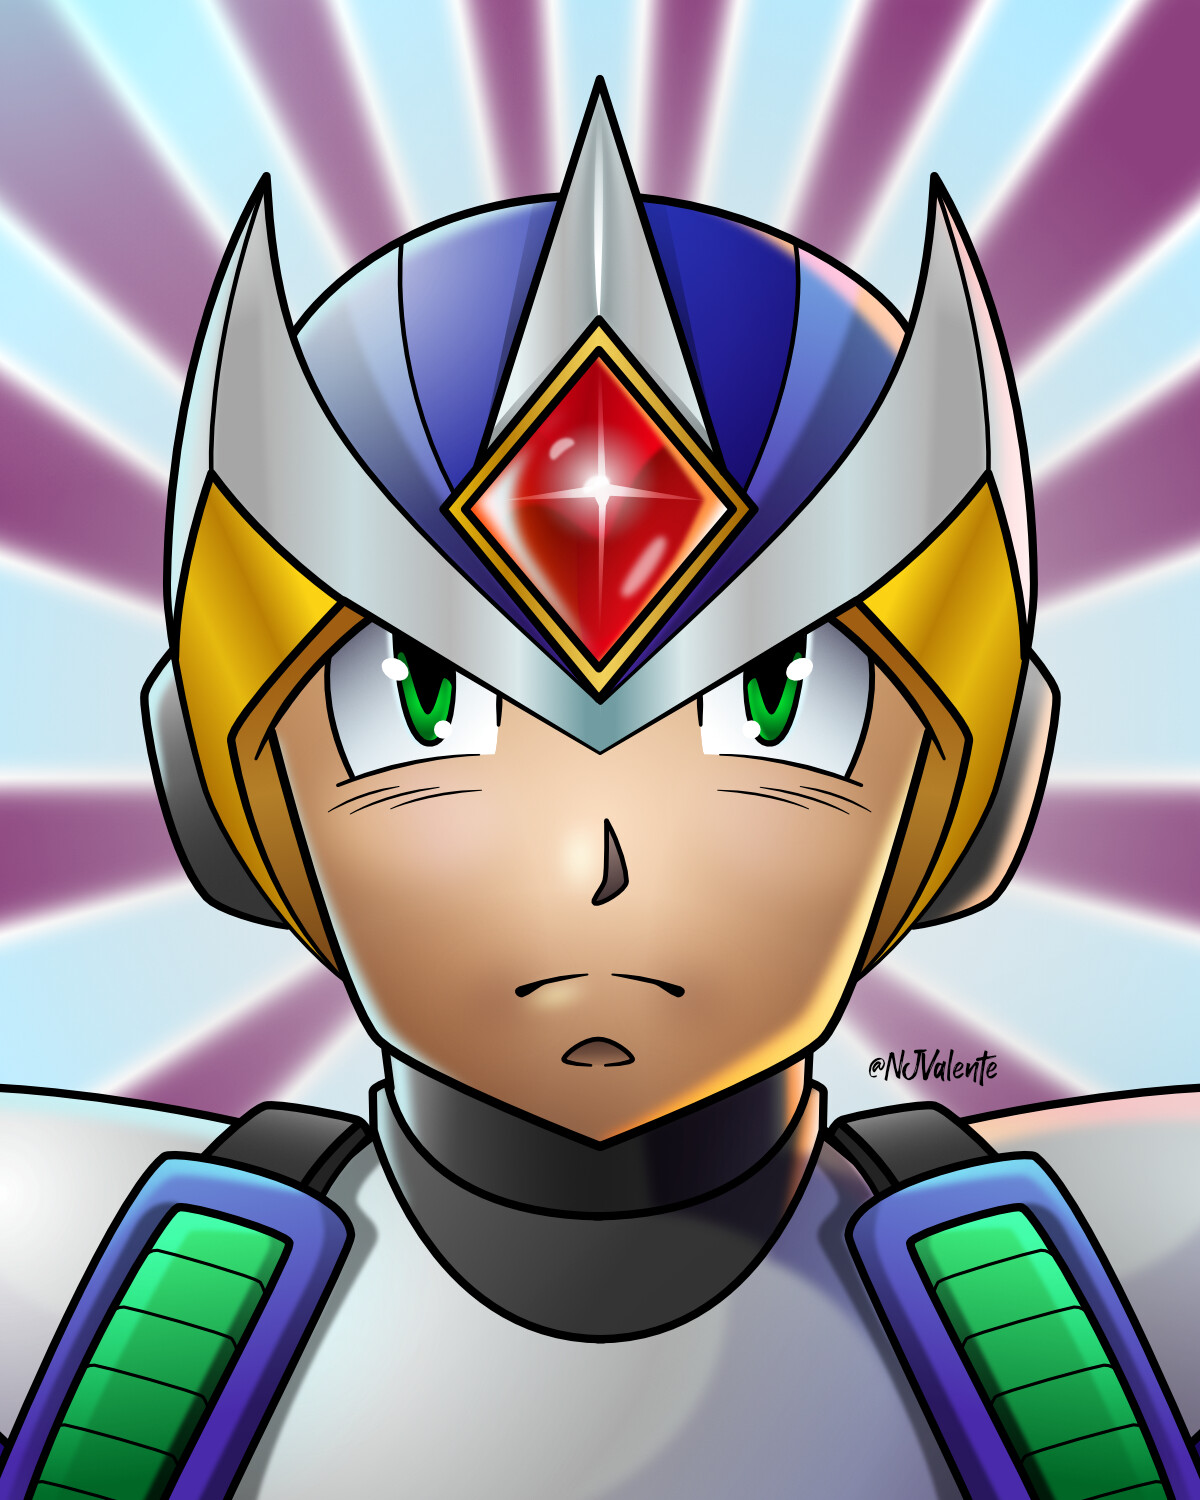 X  Second Armor from Mega Man X video game series. 